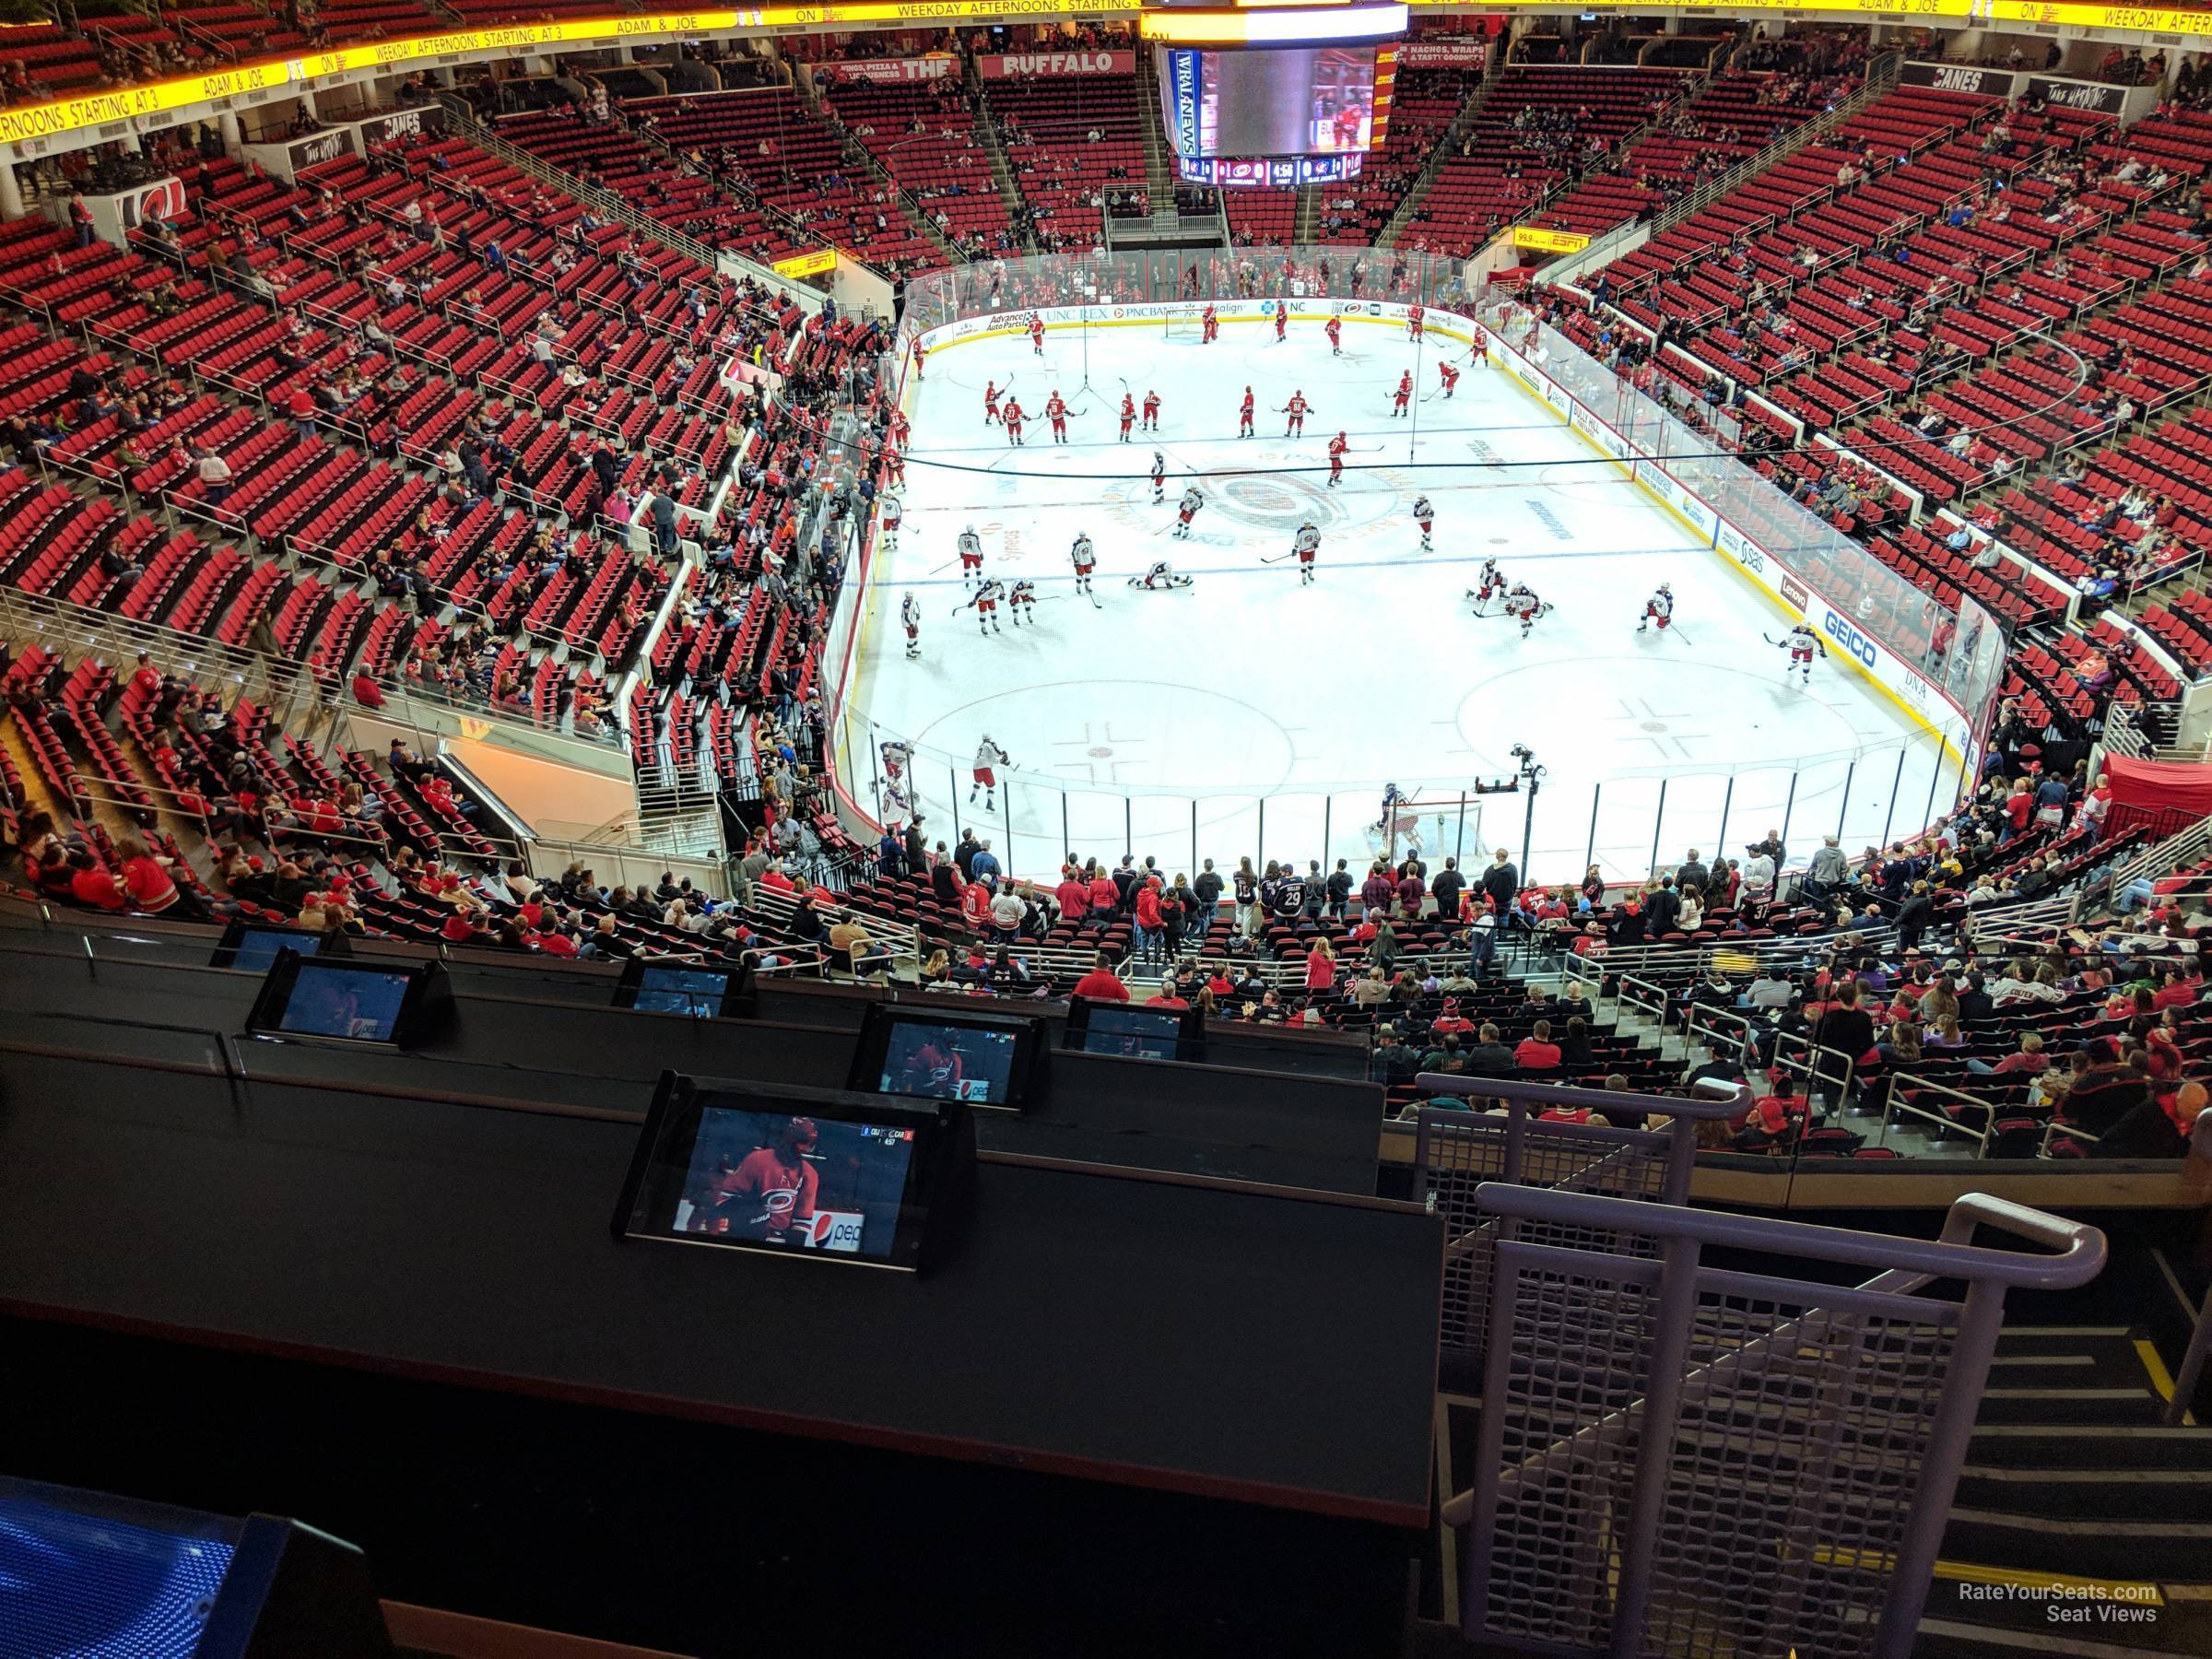 section 227 seat view  for hockey - pnc arena